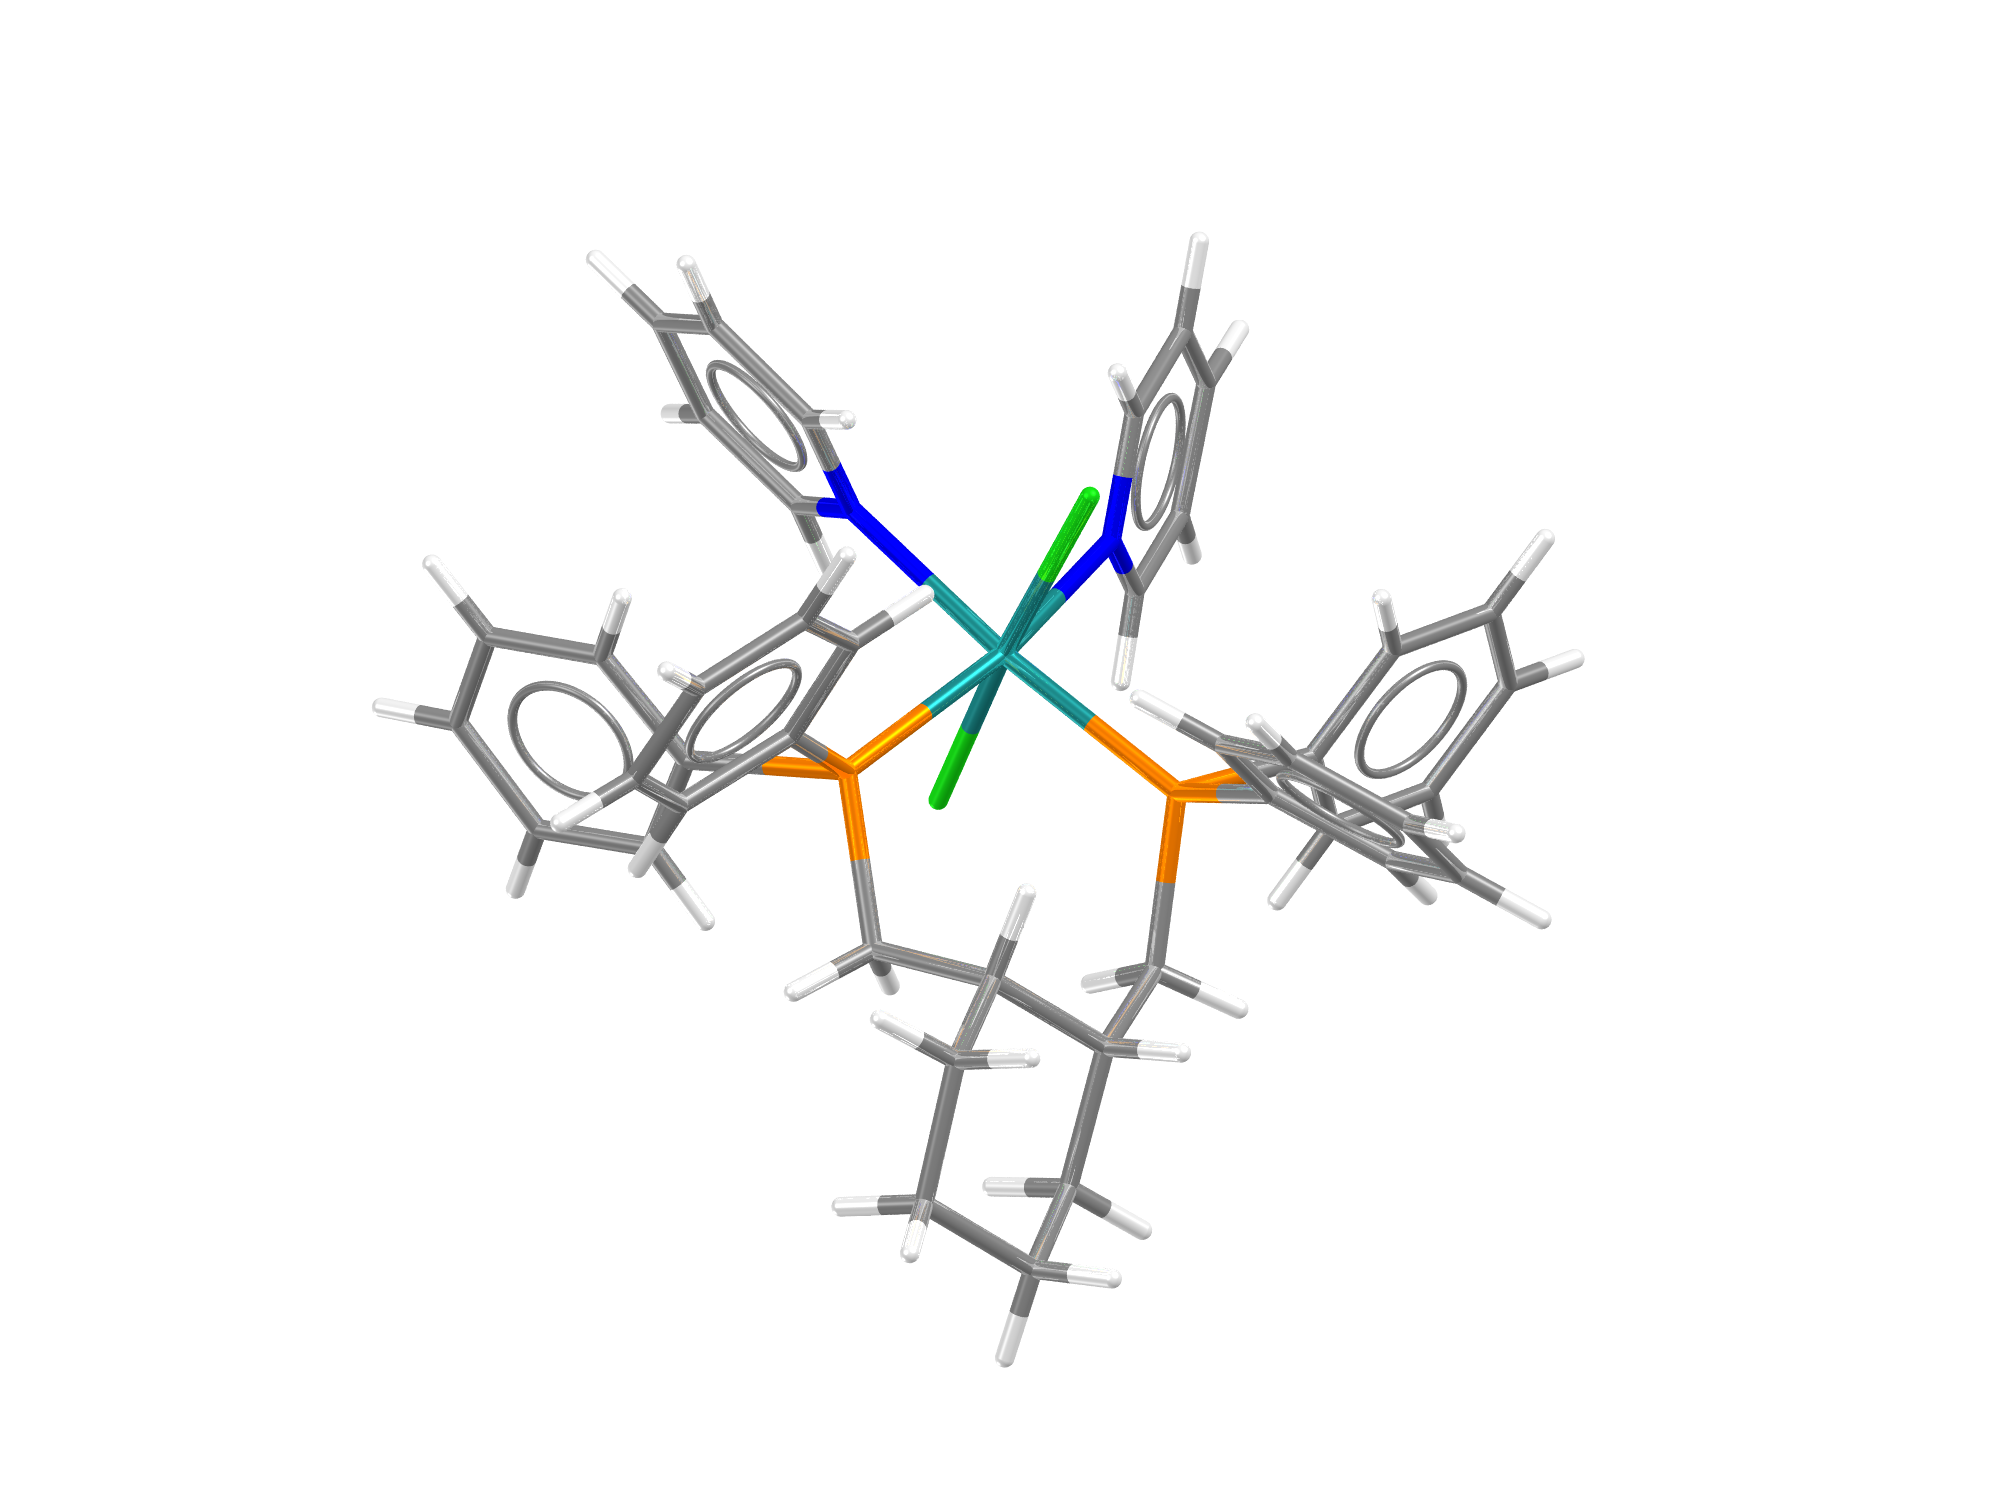 CSD Entry AHALEAD, A ruthenium complex authored by W.Clegg and R.W. Harrington and one of the 6,000+ CSD Communications added to the CSD this year.